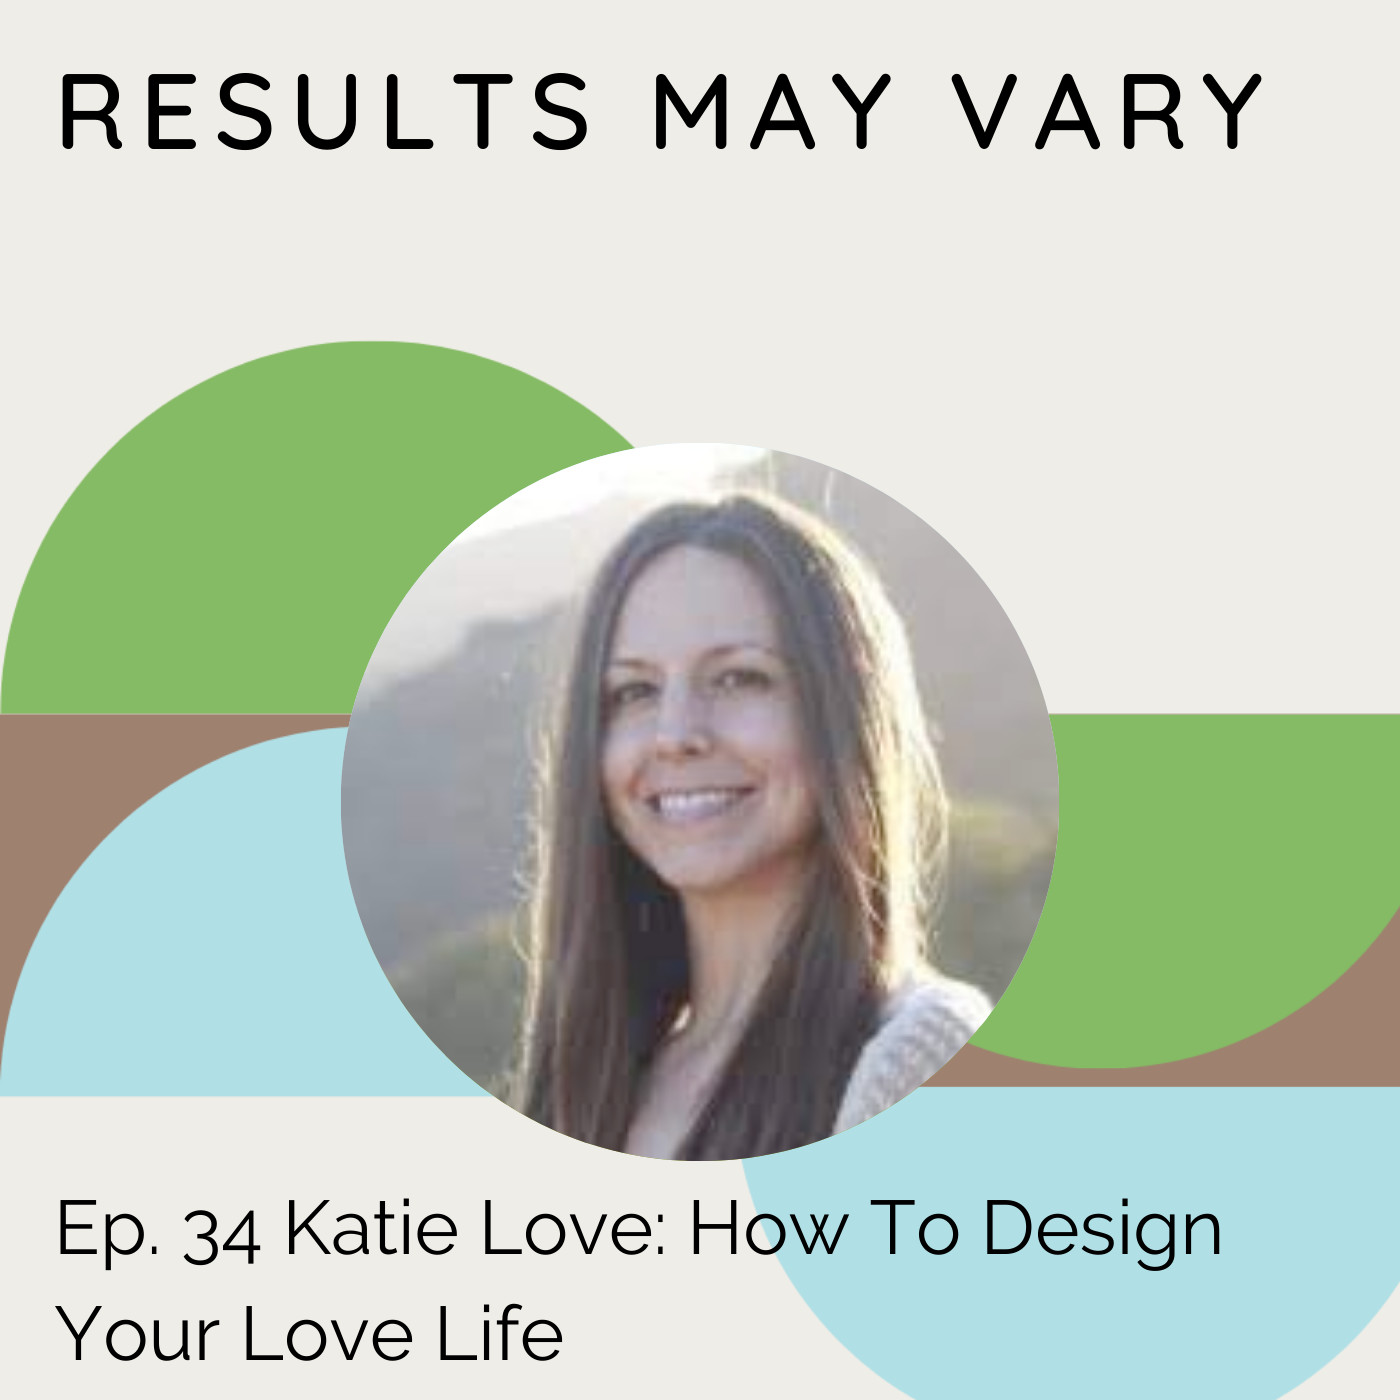 RMV 34 Katie Love: How To Design Your Love Life